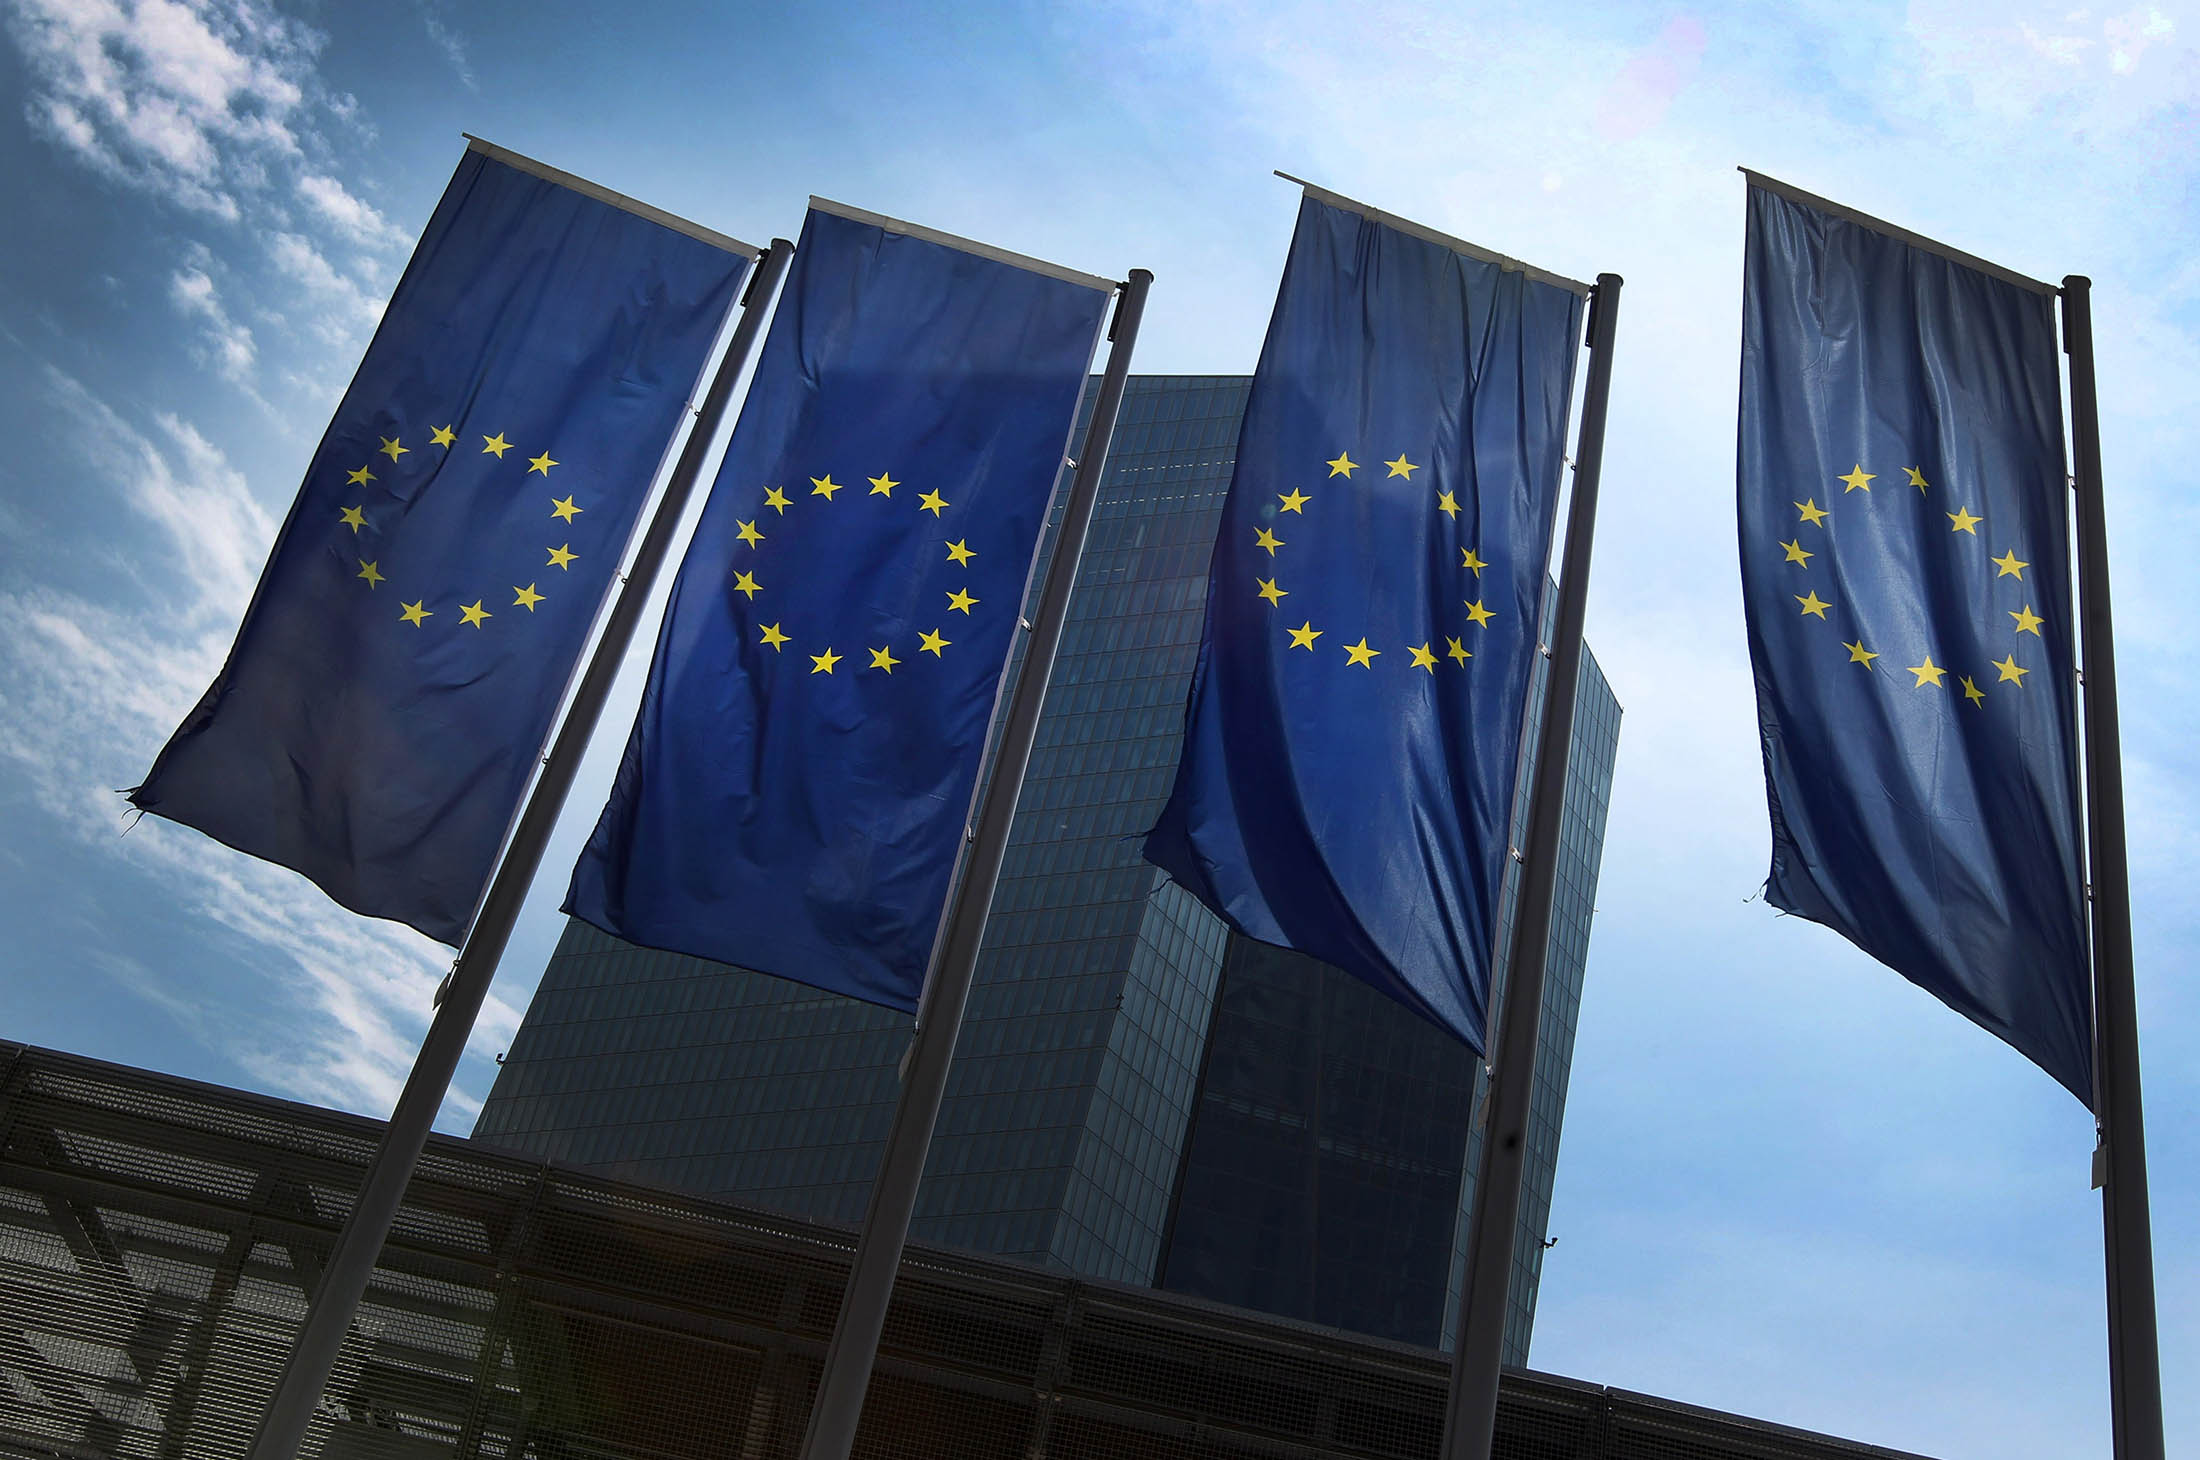 European flags are on display in front of the headquarters of the European Central Bank (ECB) in Frankfurt am Main, western Germany, on June 29, 2015. After talks between Athens and its creditors broke down, leaving Greece headed for an EU-IMF default and possible exit from the eurozone, the ECB said on June 28, 2015 it would keep open Emergency Liquidity Assistance (ELA) to the debt-hit country's banks. AFP PHOTO / DANIEL ROLAND (Photo credit should read DANIEL ROLAND/AFP/Getty Images)
